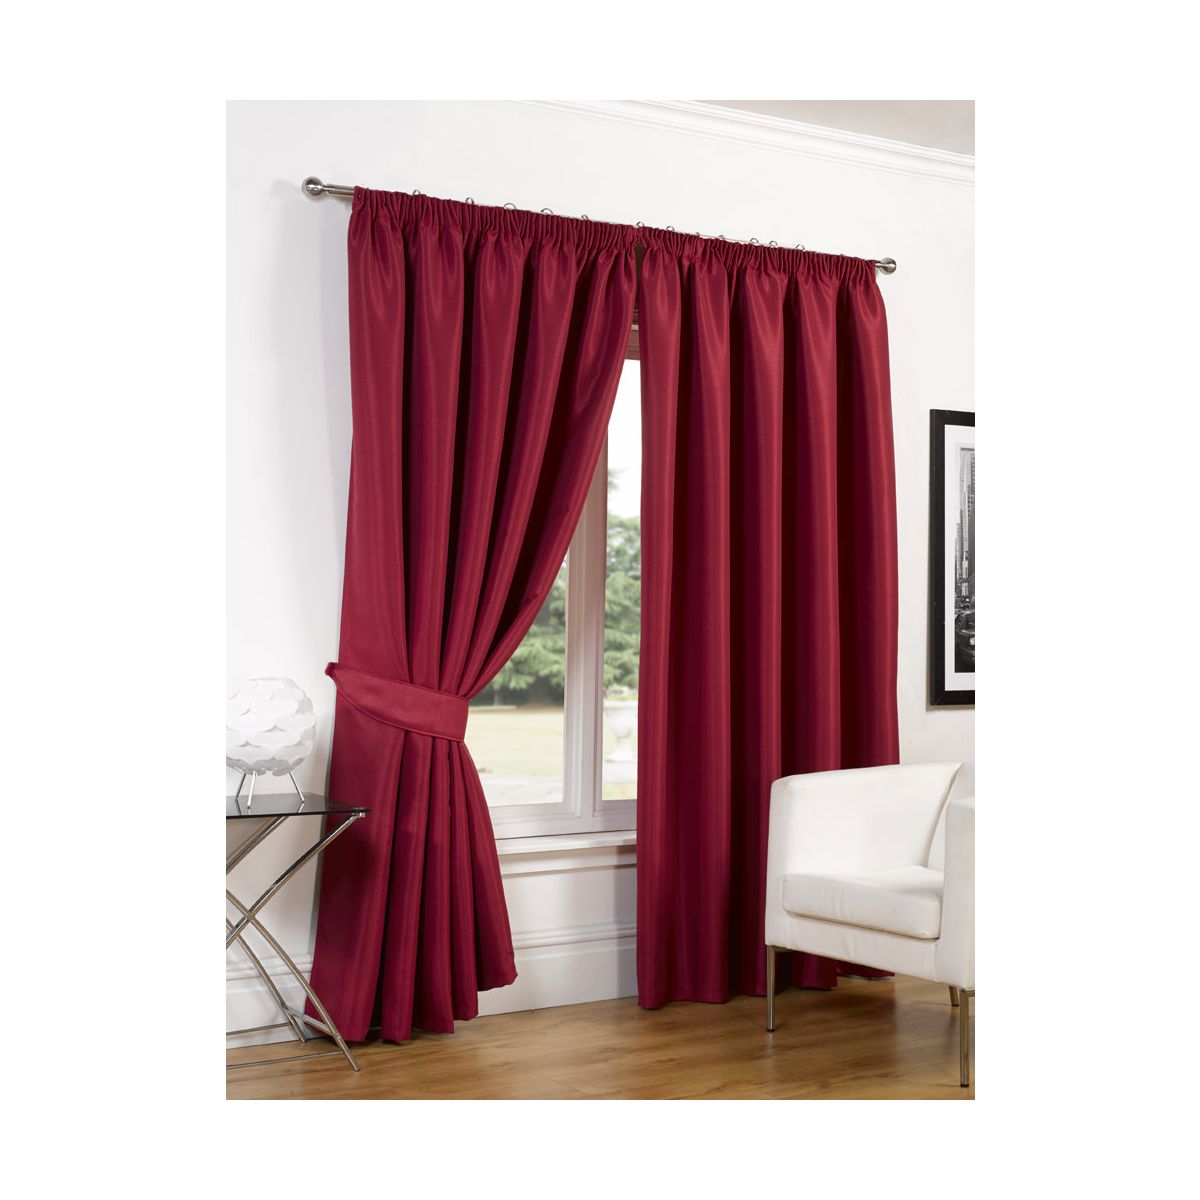 Luxury Faux Silk Blackout Curtains Including Tiebacks - Red 66"X72"